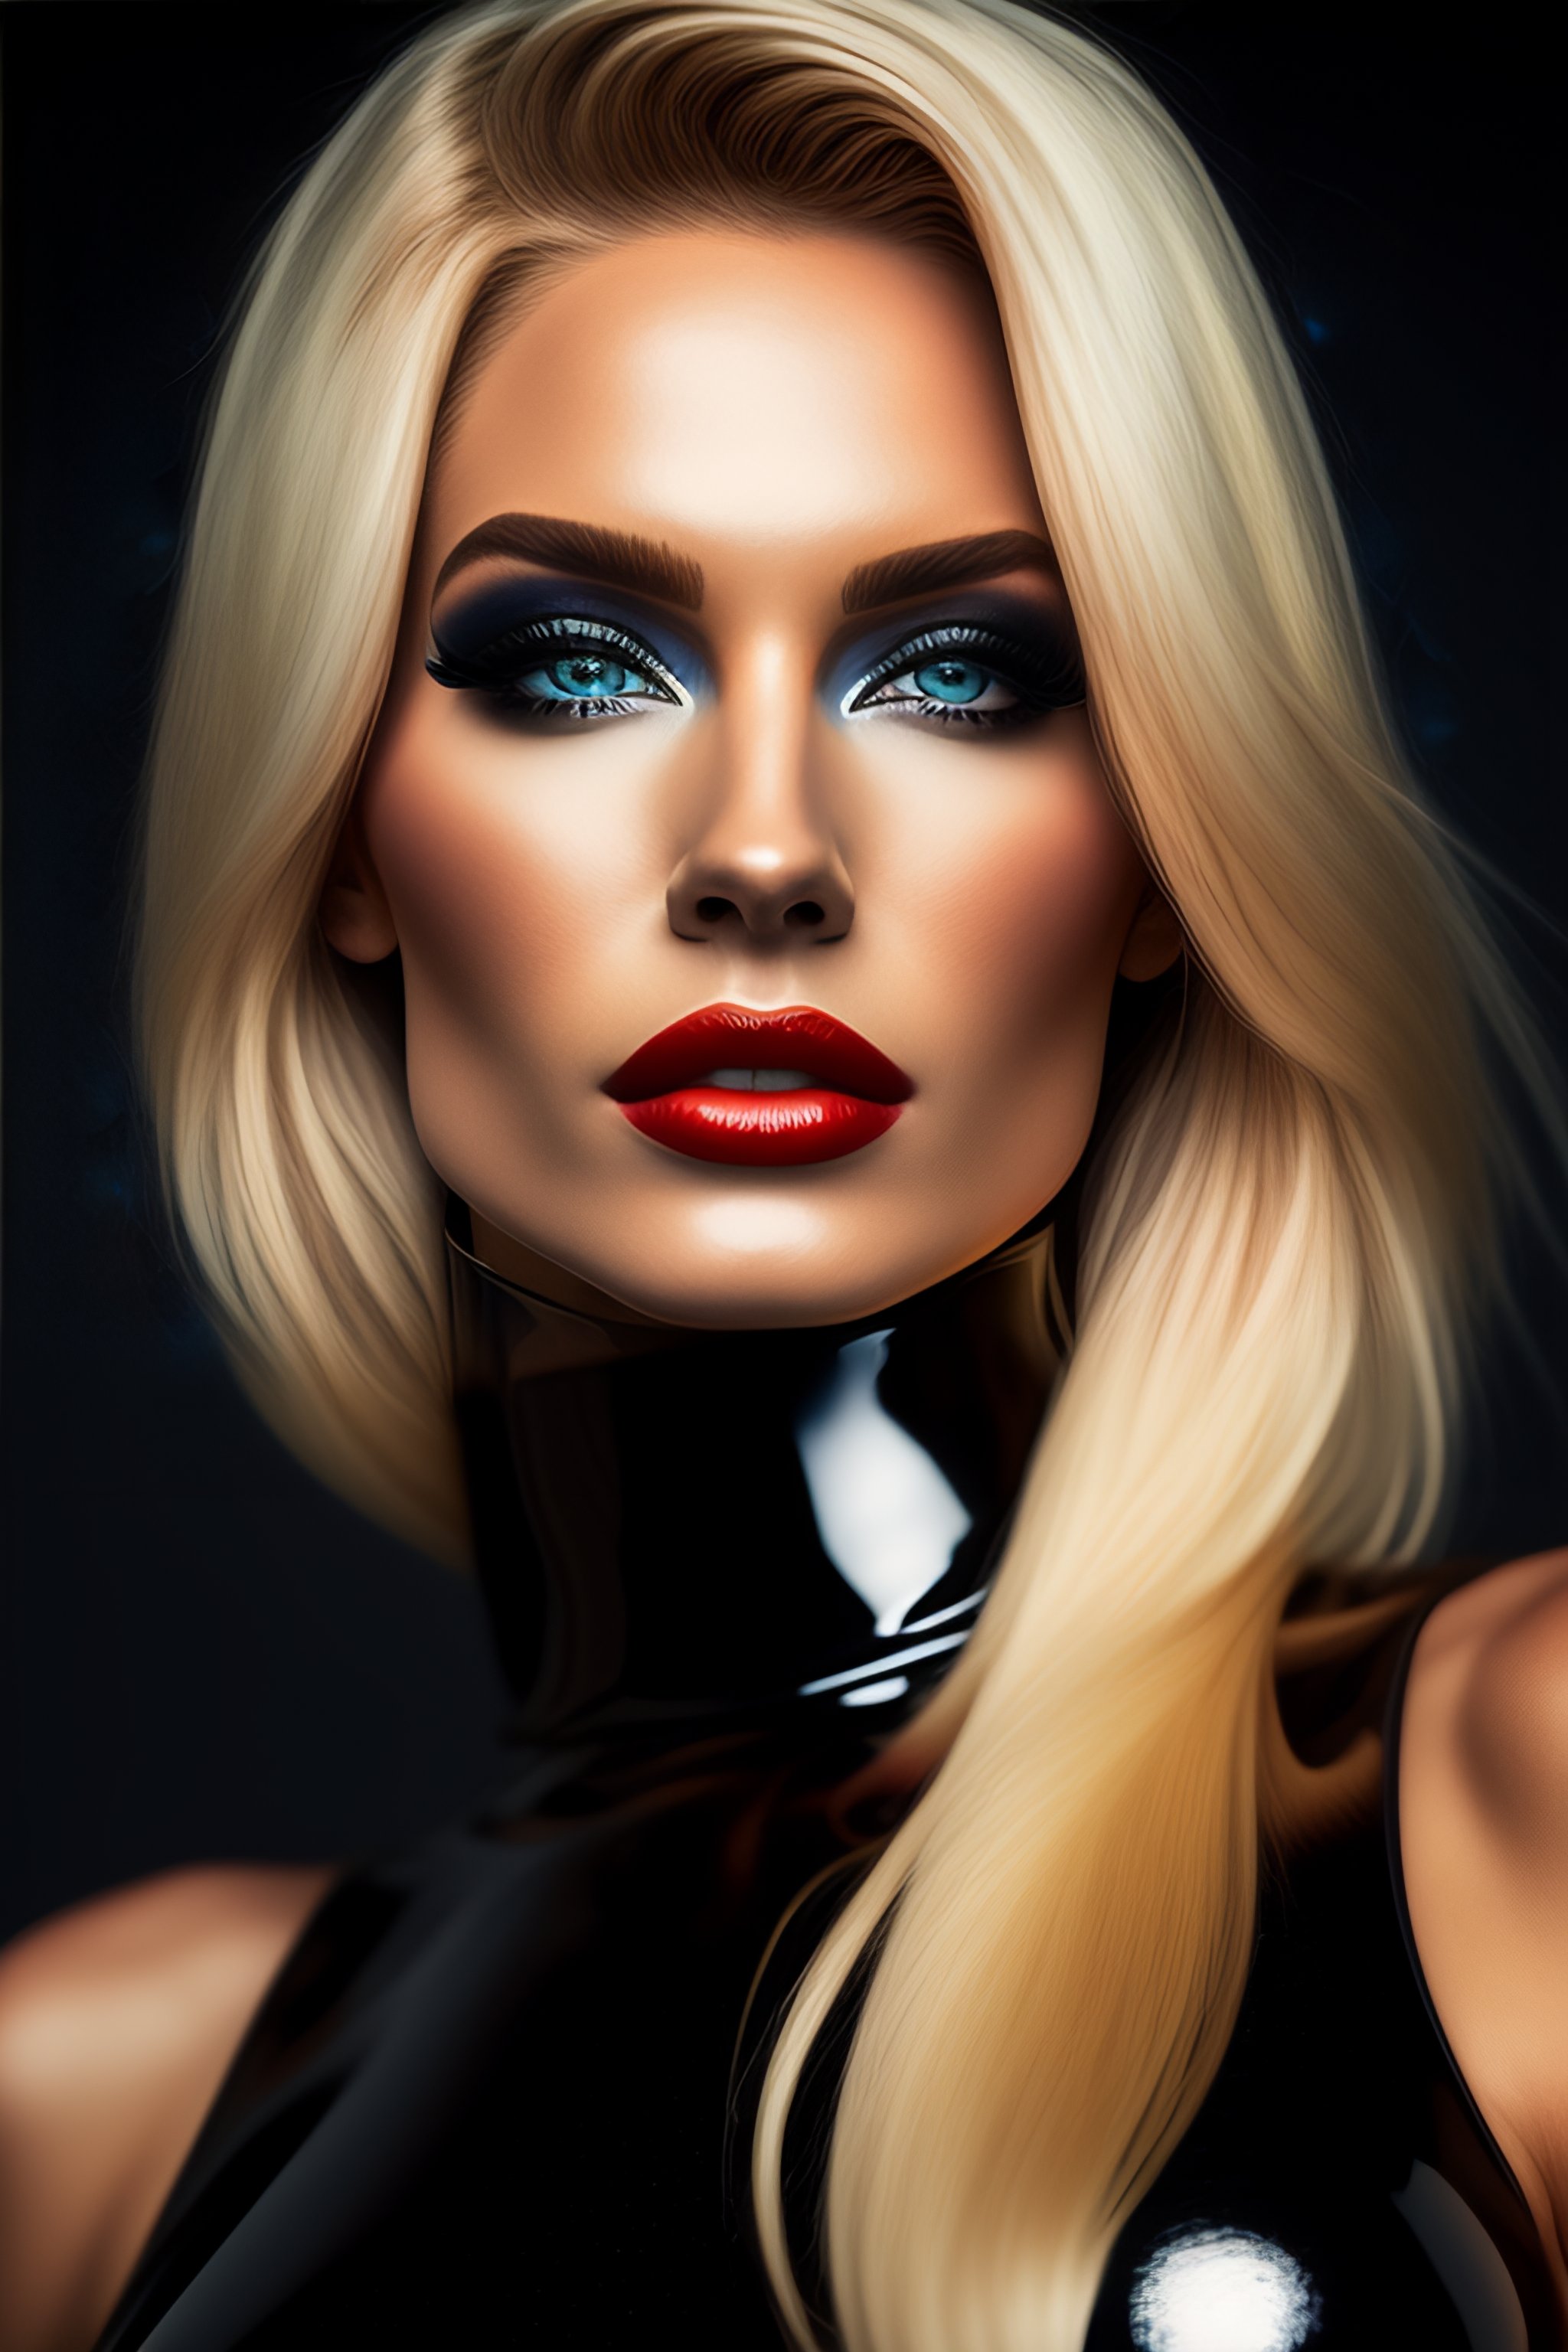 Lexica - Hot blonde with blue eyes, black latex full body suit